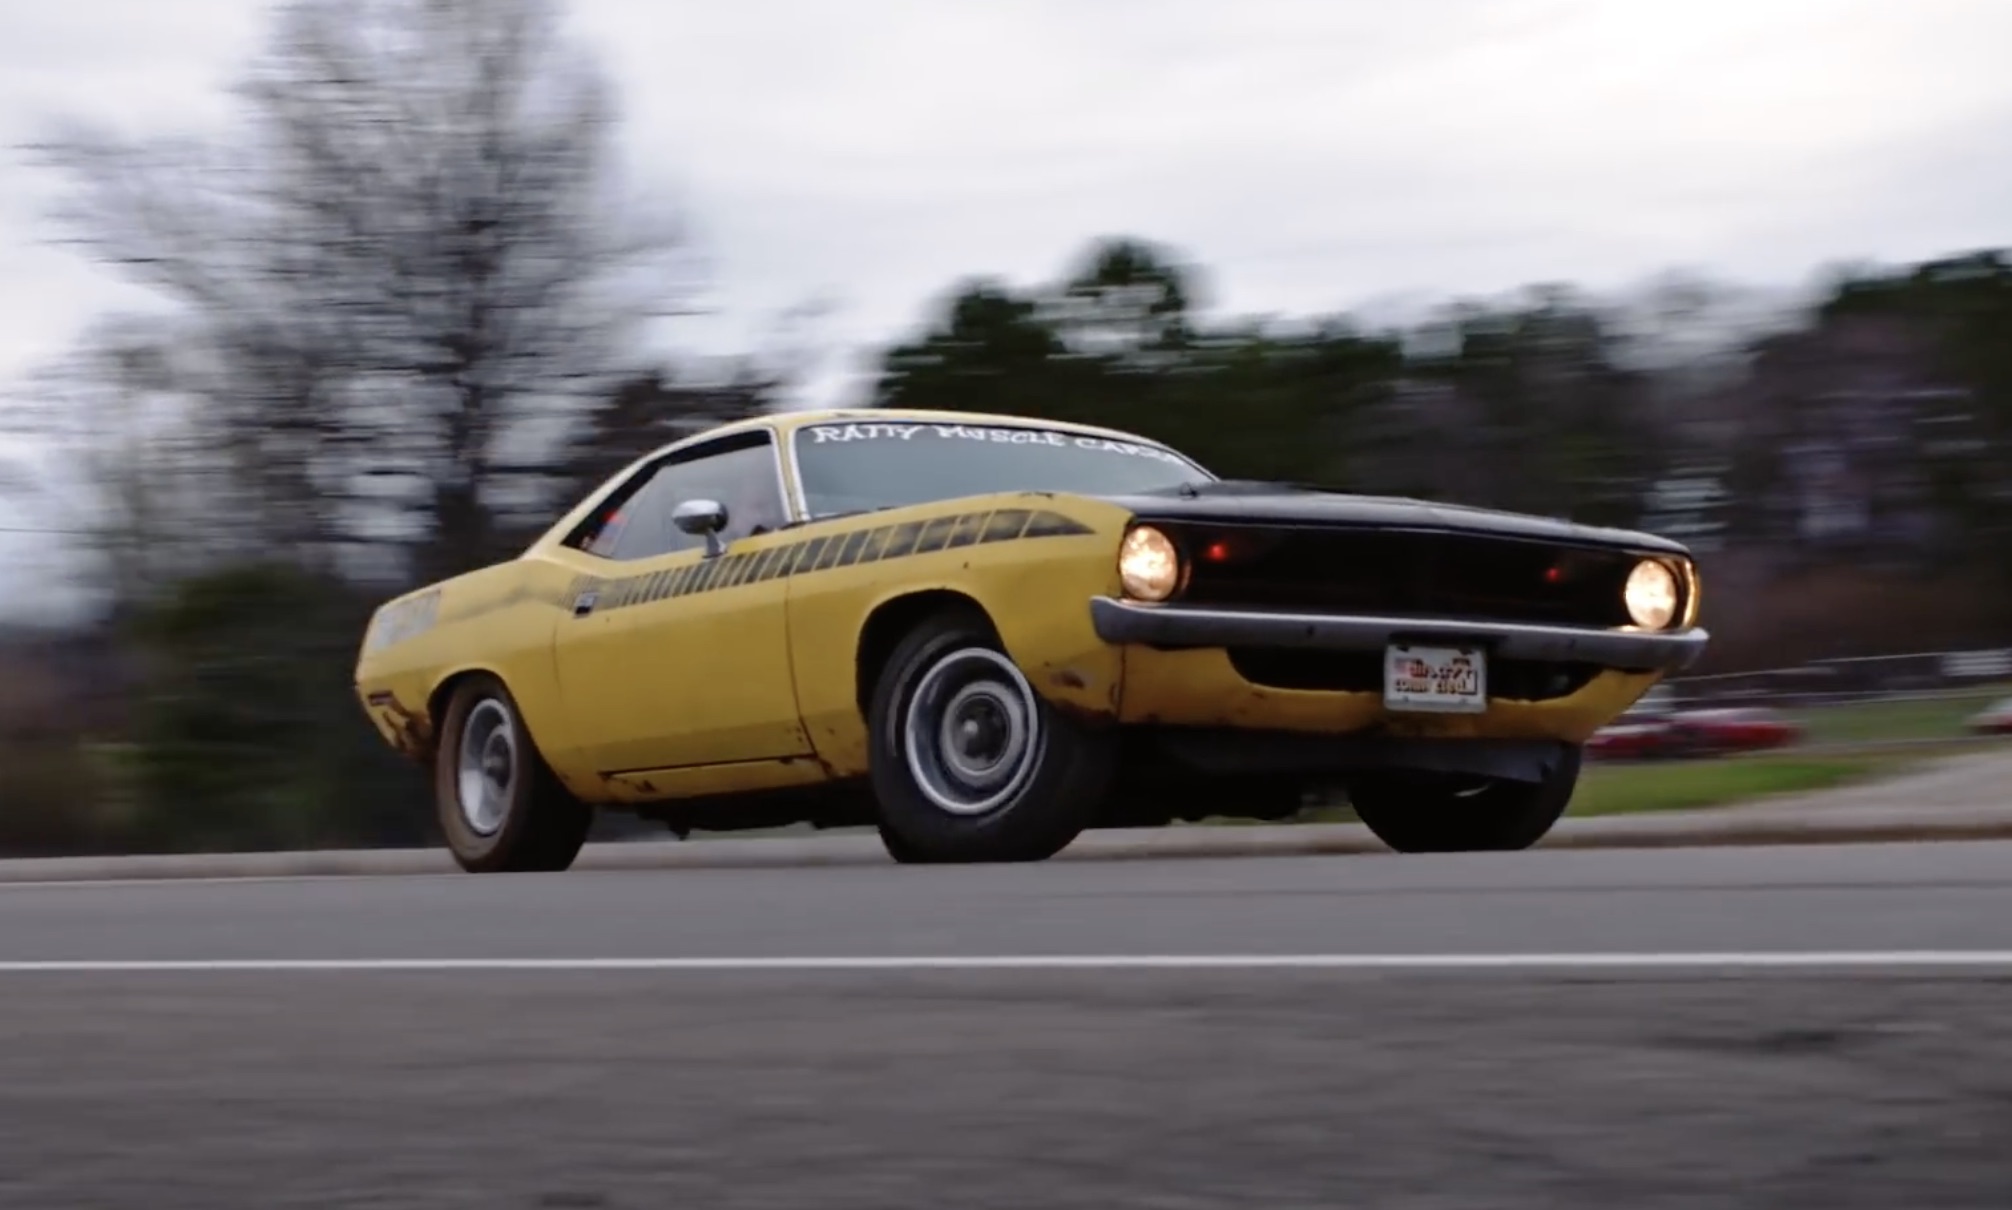 Ever Wonder What The Theory Of The Ratty Muscle Cars Is All About? Learn More About The Movement Here!